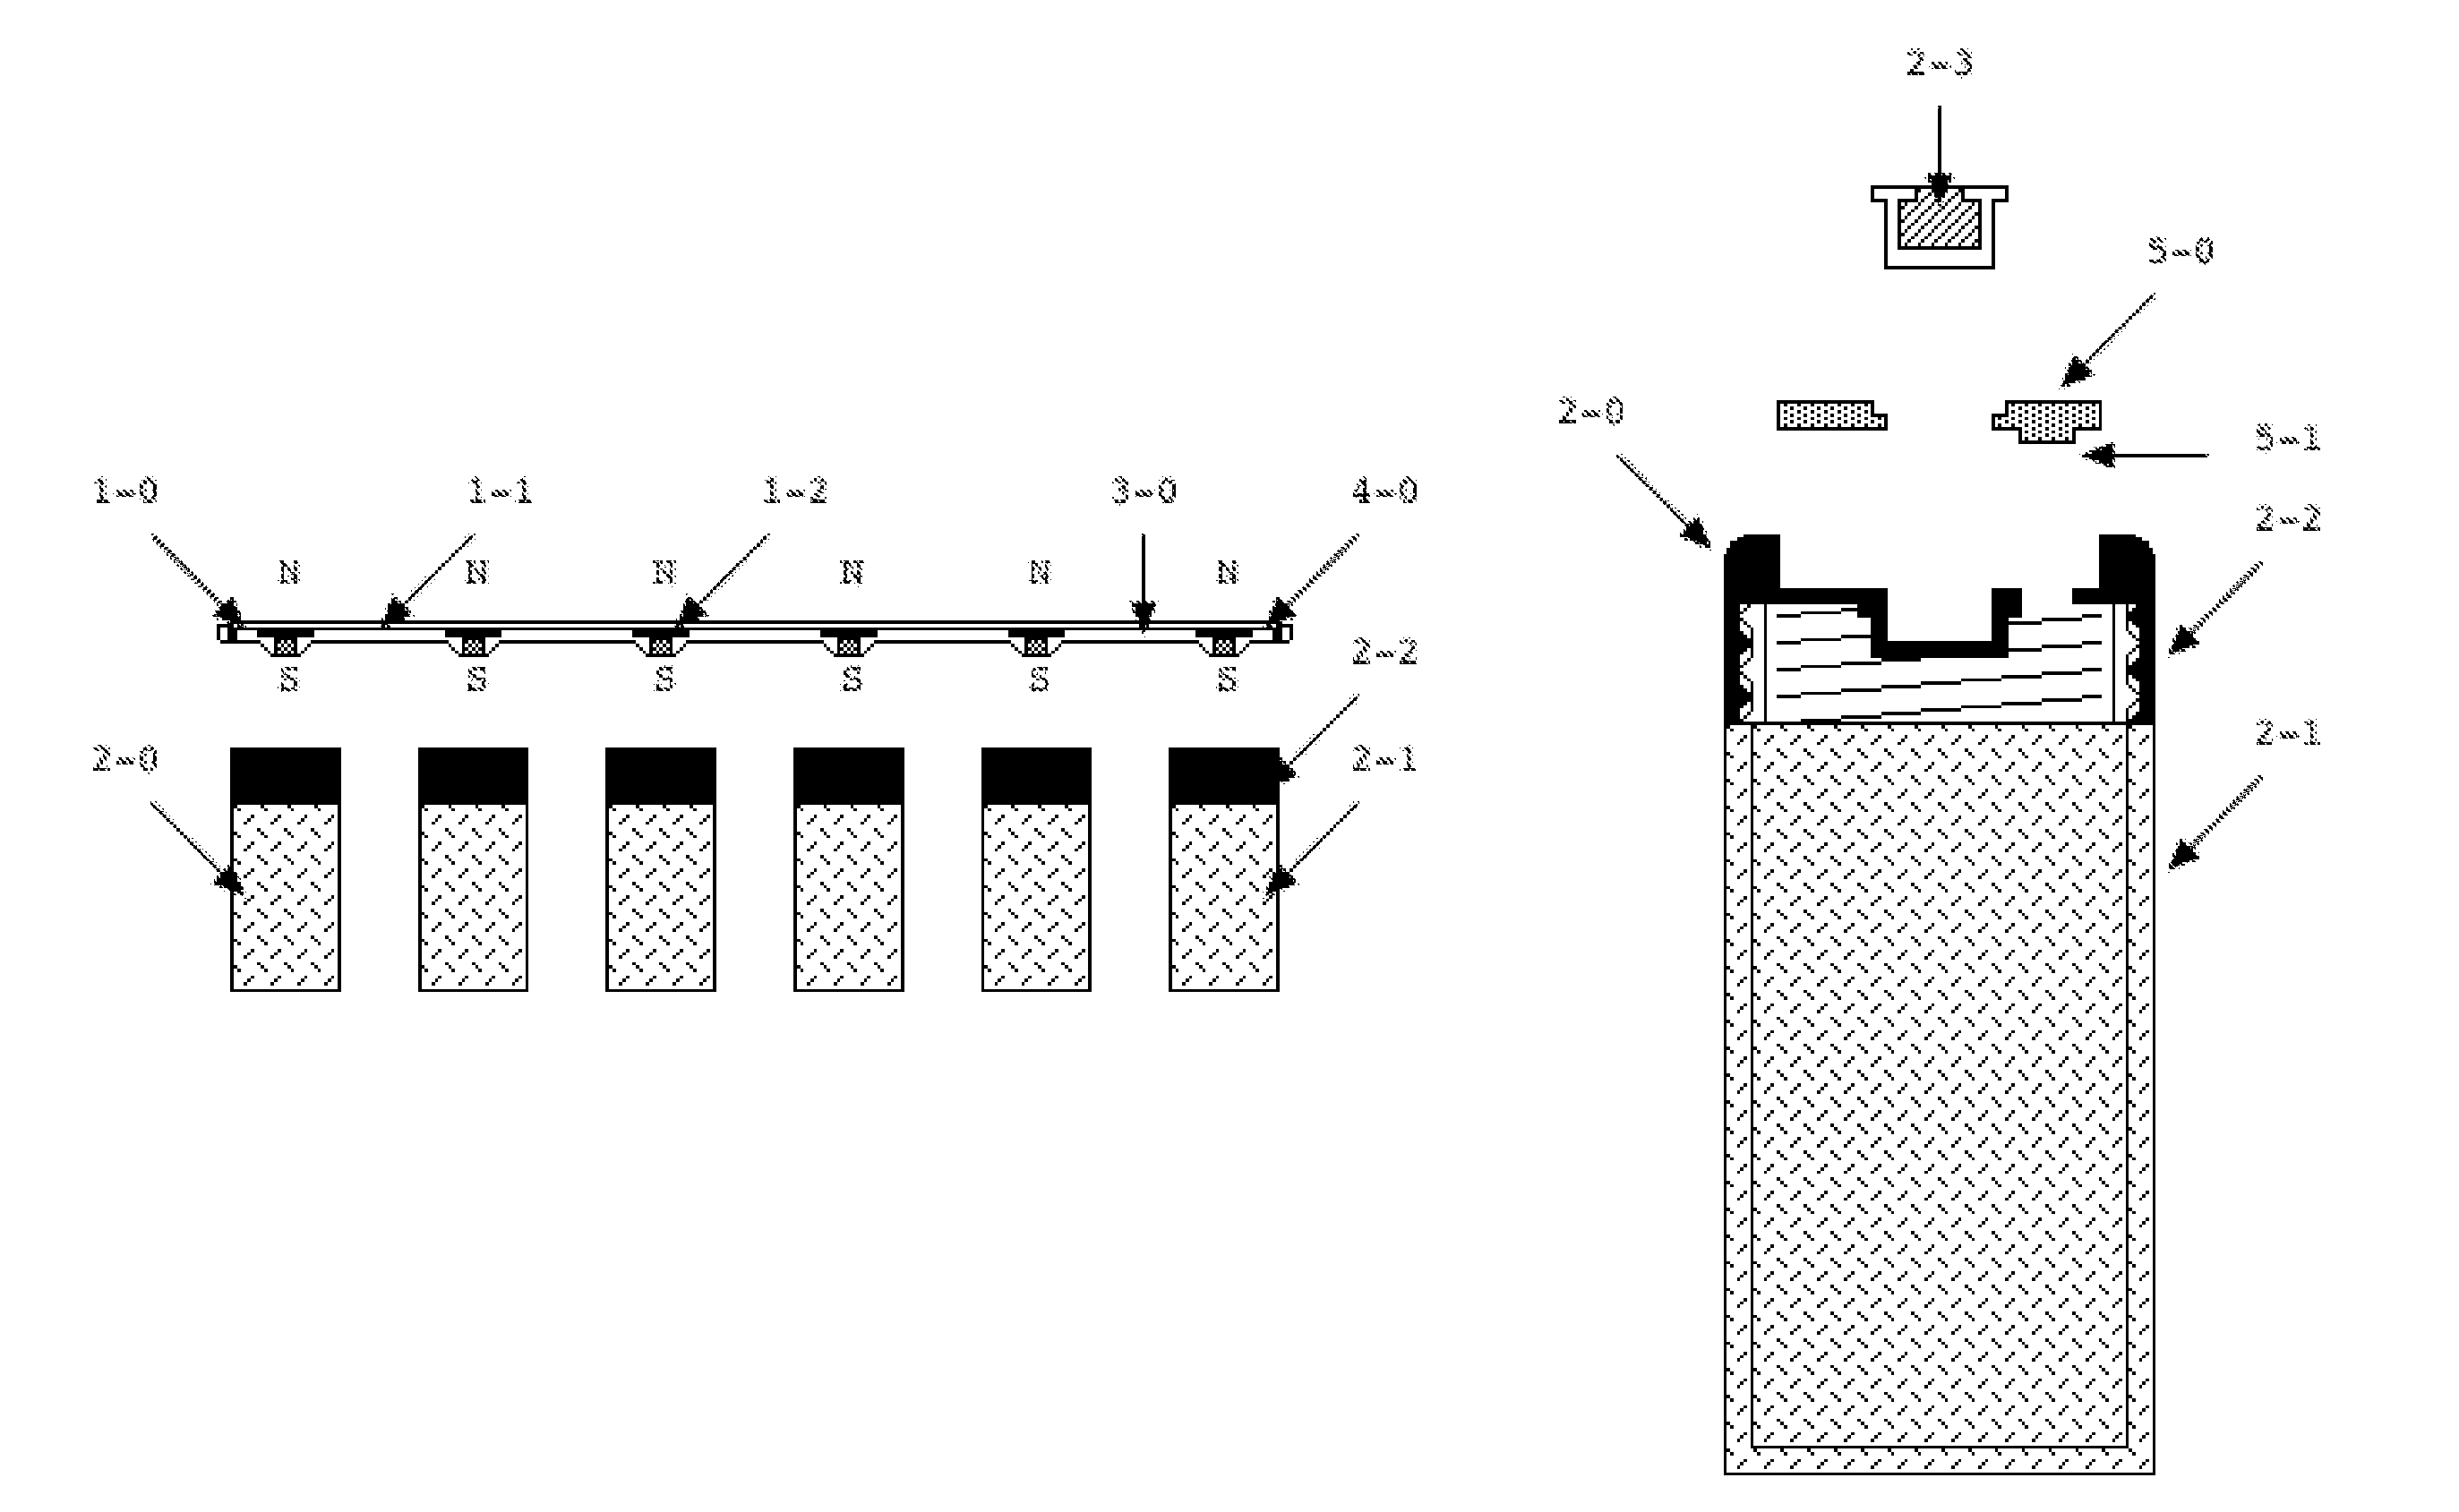 Magnetically-hanging spice dispenser with a continuously-variable hole-size selector